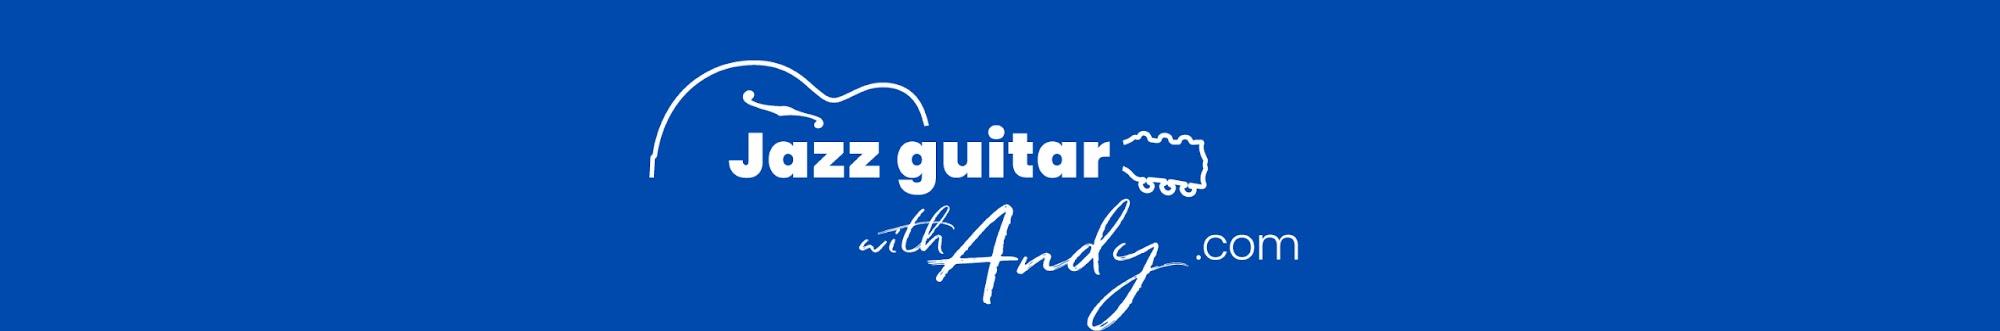 Jazz guitar with Andy